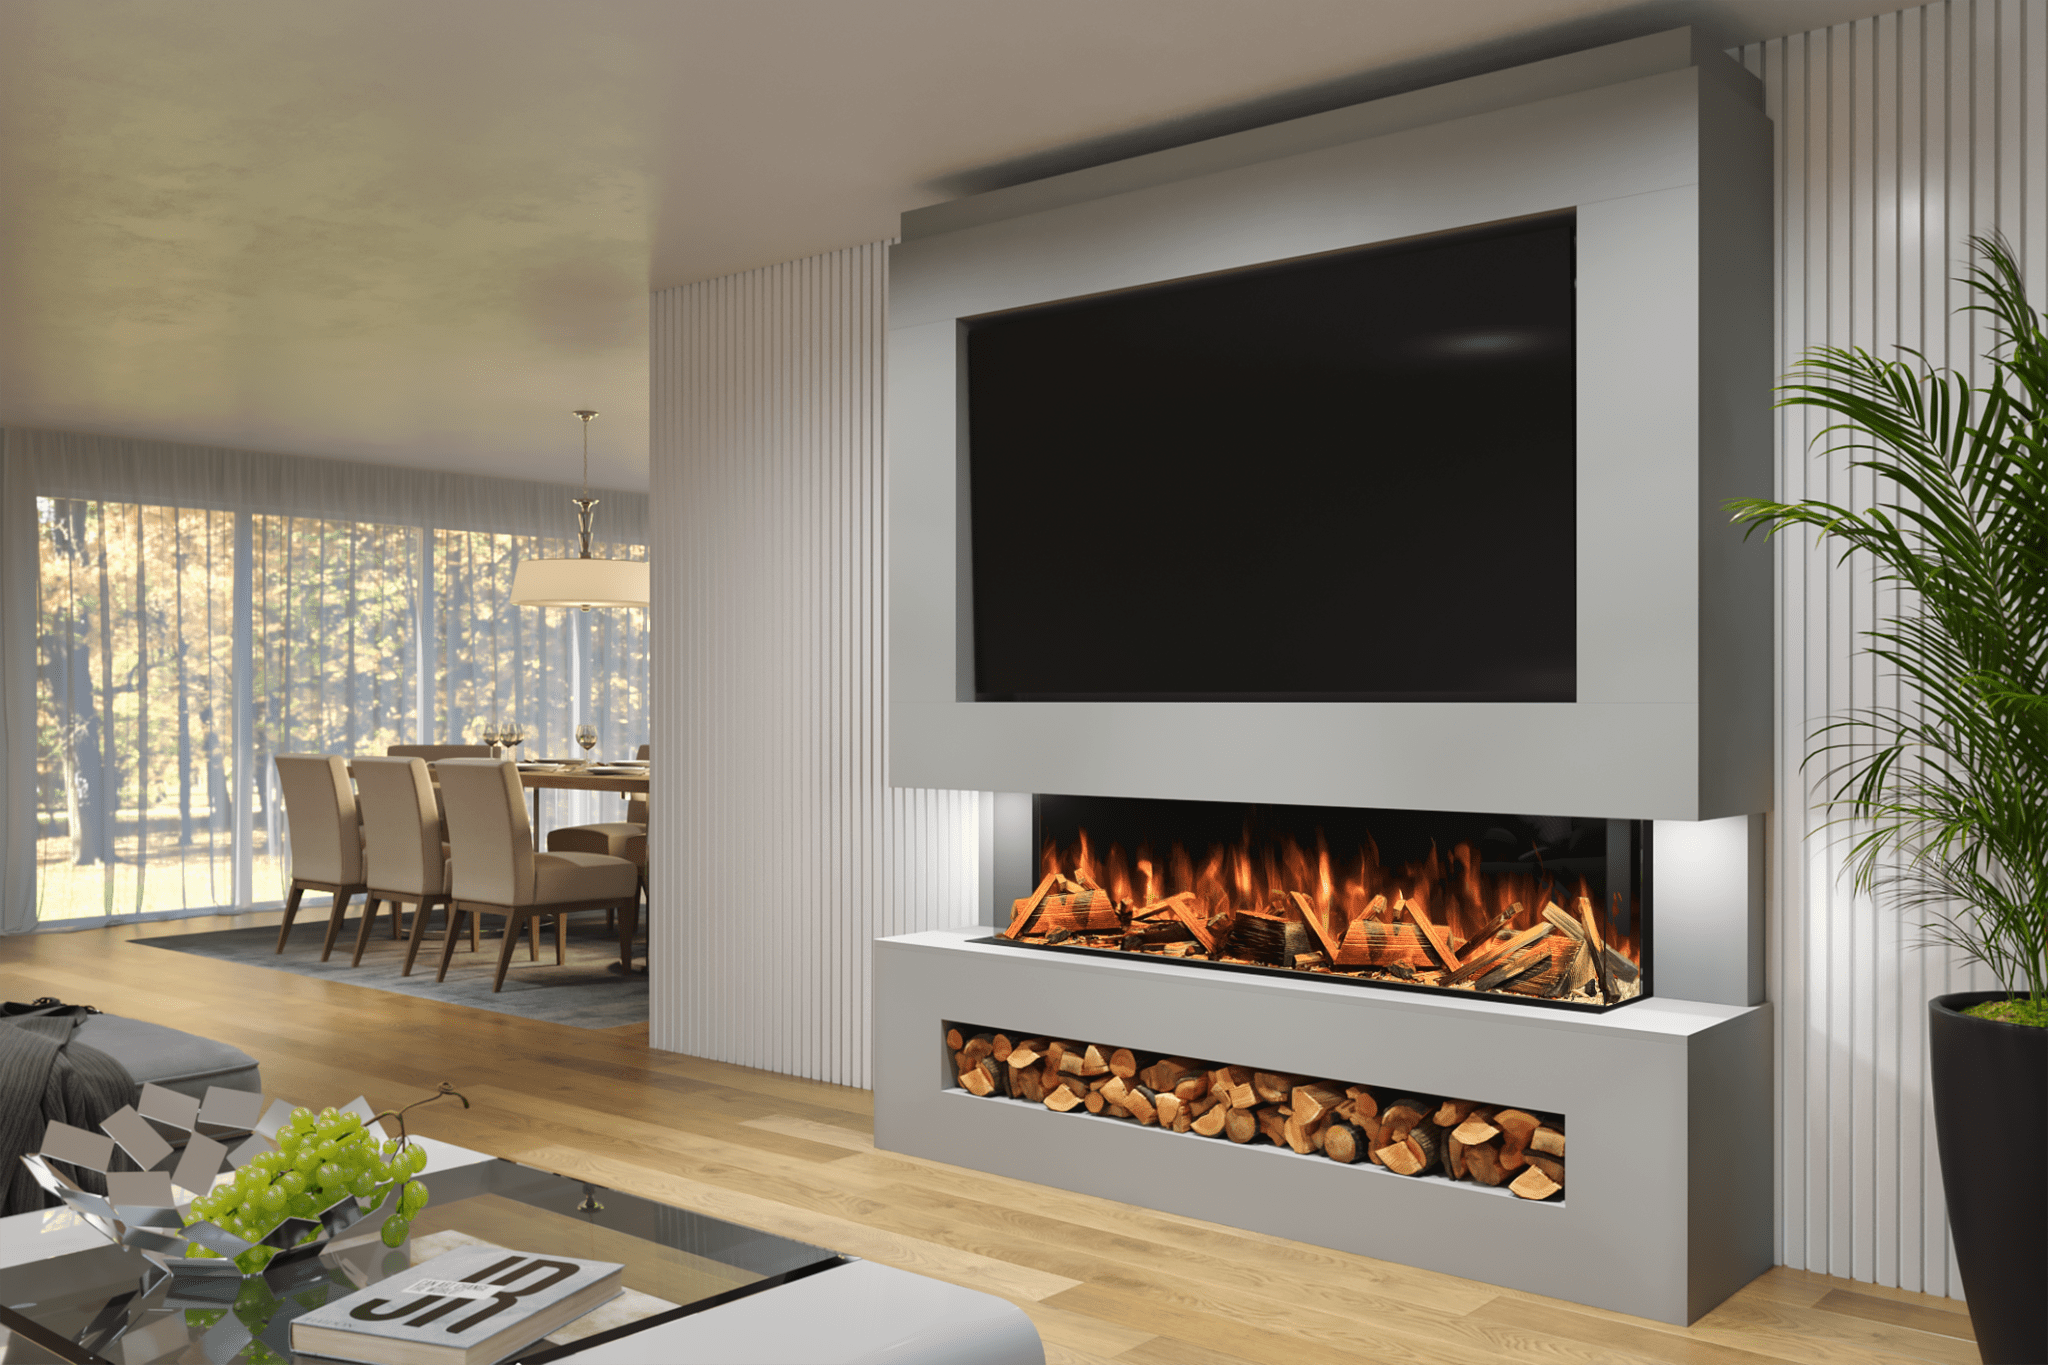 Check 3 Sided Electric Fireplaces in the UK